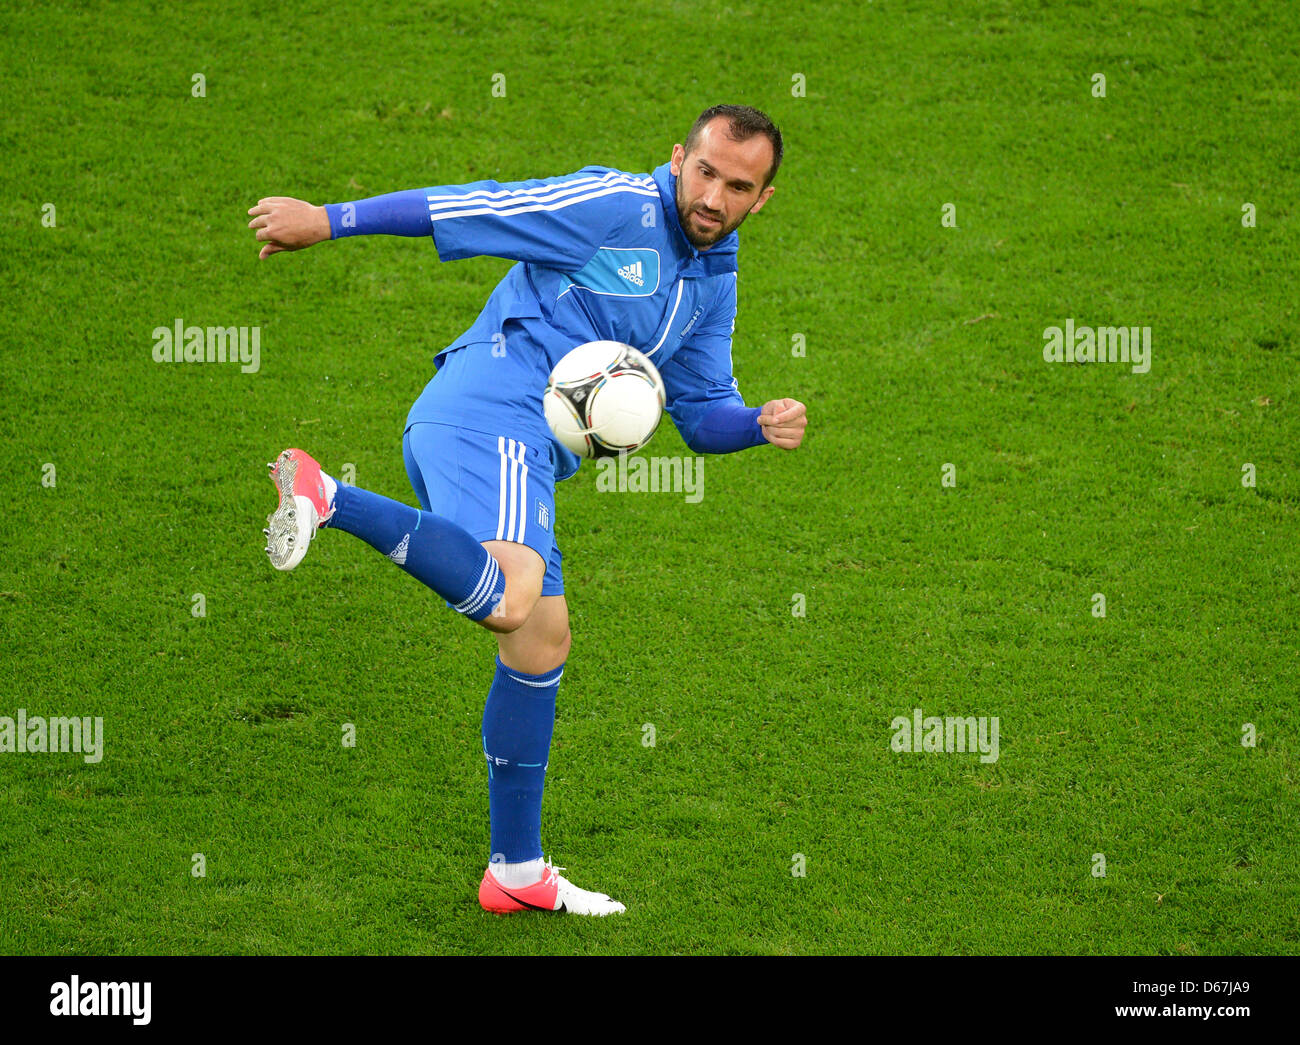 Greece's Theofanis Gekas practices during a training session of the Greek national soccer team at Arena Gdansk in Gdansk, Poland, 21 June 2012. Photo: Marcus Brandt dpa (Please refer to chapters 7 and 8 of http://dpaq.de/Ziovh for UEFA Euro 2012 Terms & Conditions)  +++(c) dpa - Bildfunk+++ Stock Photo